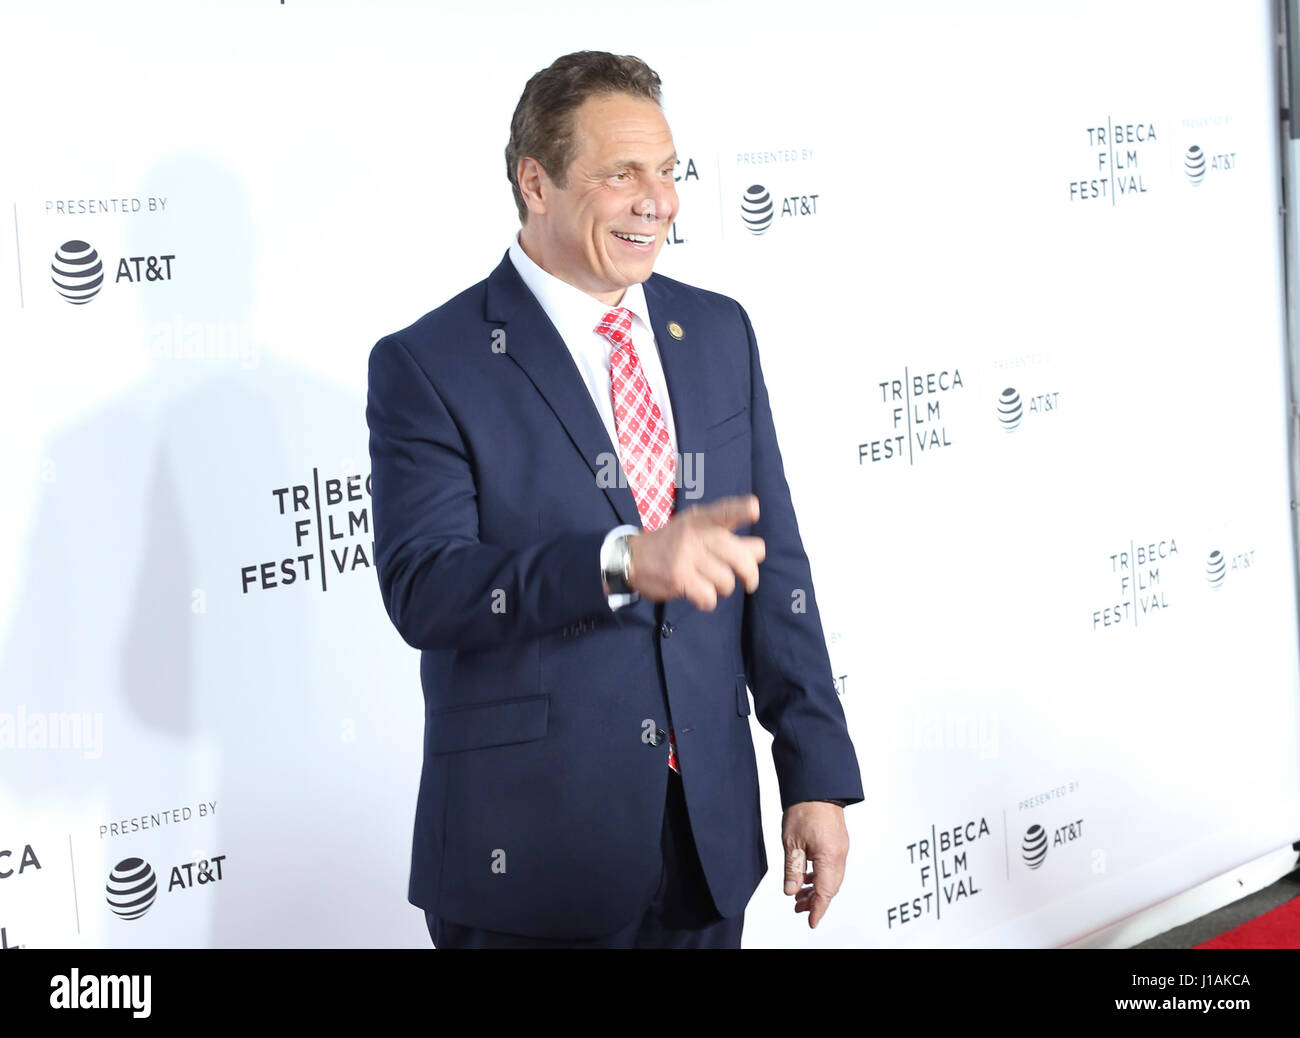 New York, USA. 19. April 2017. Gouverneur von New York, Andrew Cuomo kommt bei der 2017 Tribeca Film Festival Opening Night, Clive Davis: The Soundtrack Of Our lebt Credit: The Foto Zugang/Alamy Live News Stockfoto